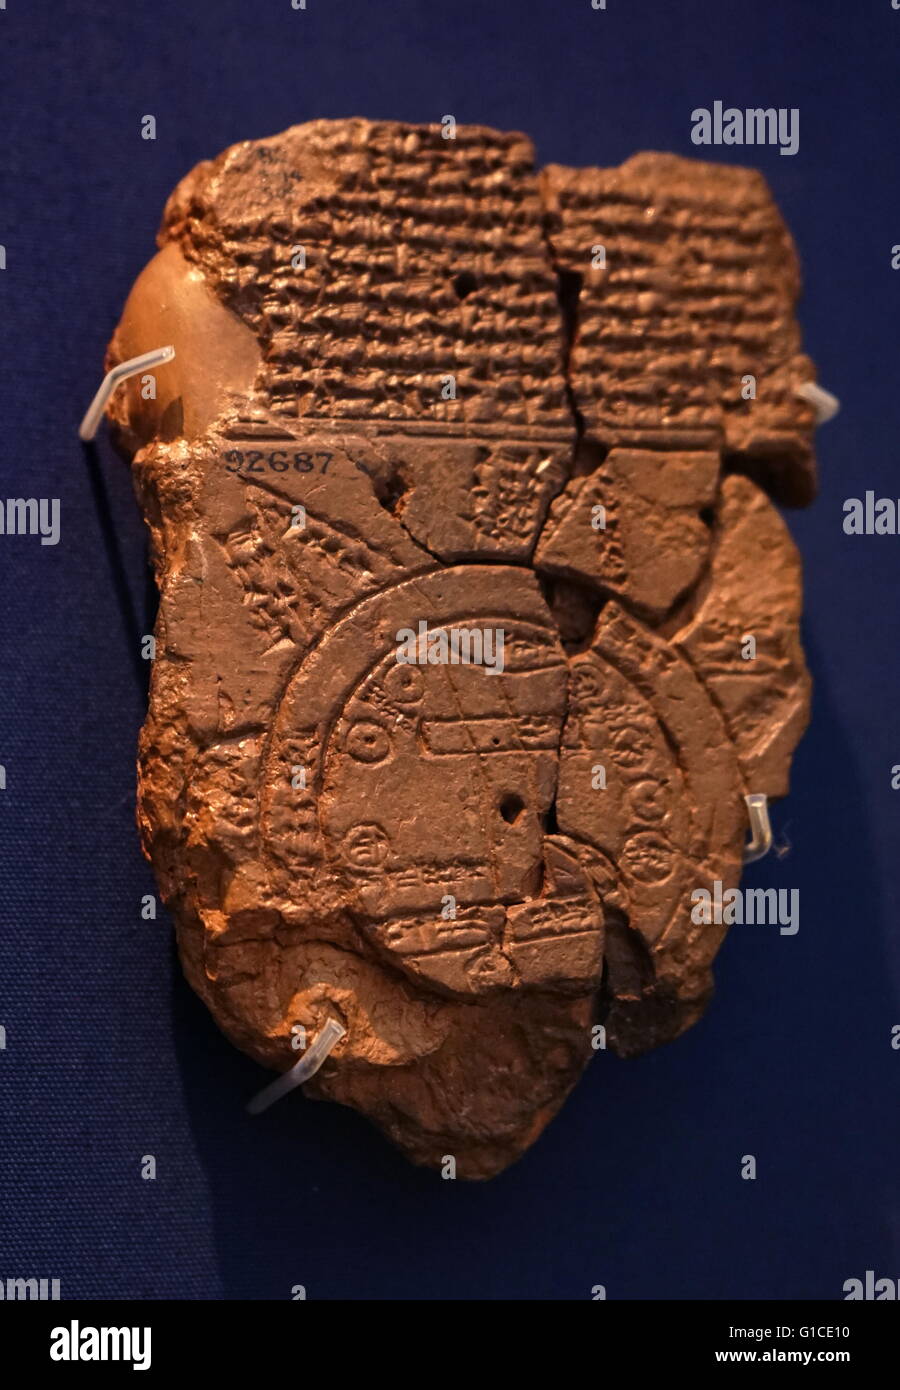 Babylonian Clay Tablet High Resolution Stock Photography and Images - Alamy